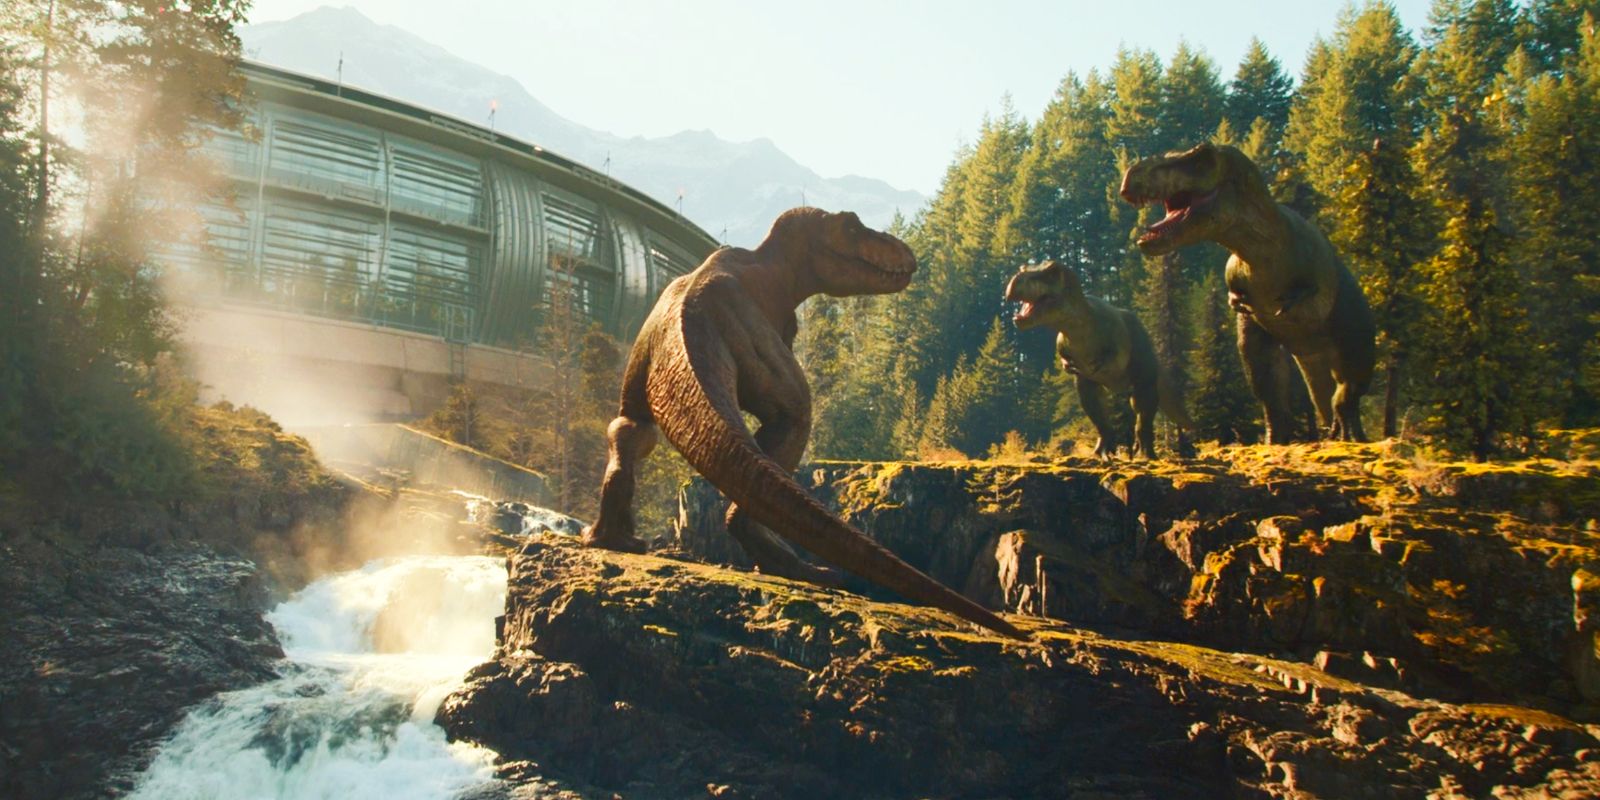 Three T-rexes standing on top of cliffs in Jurassic World Dominion